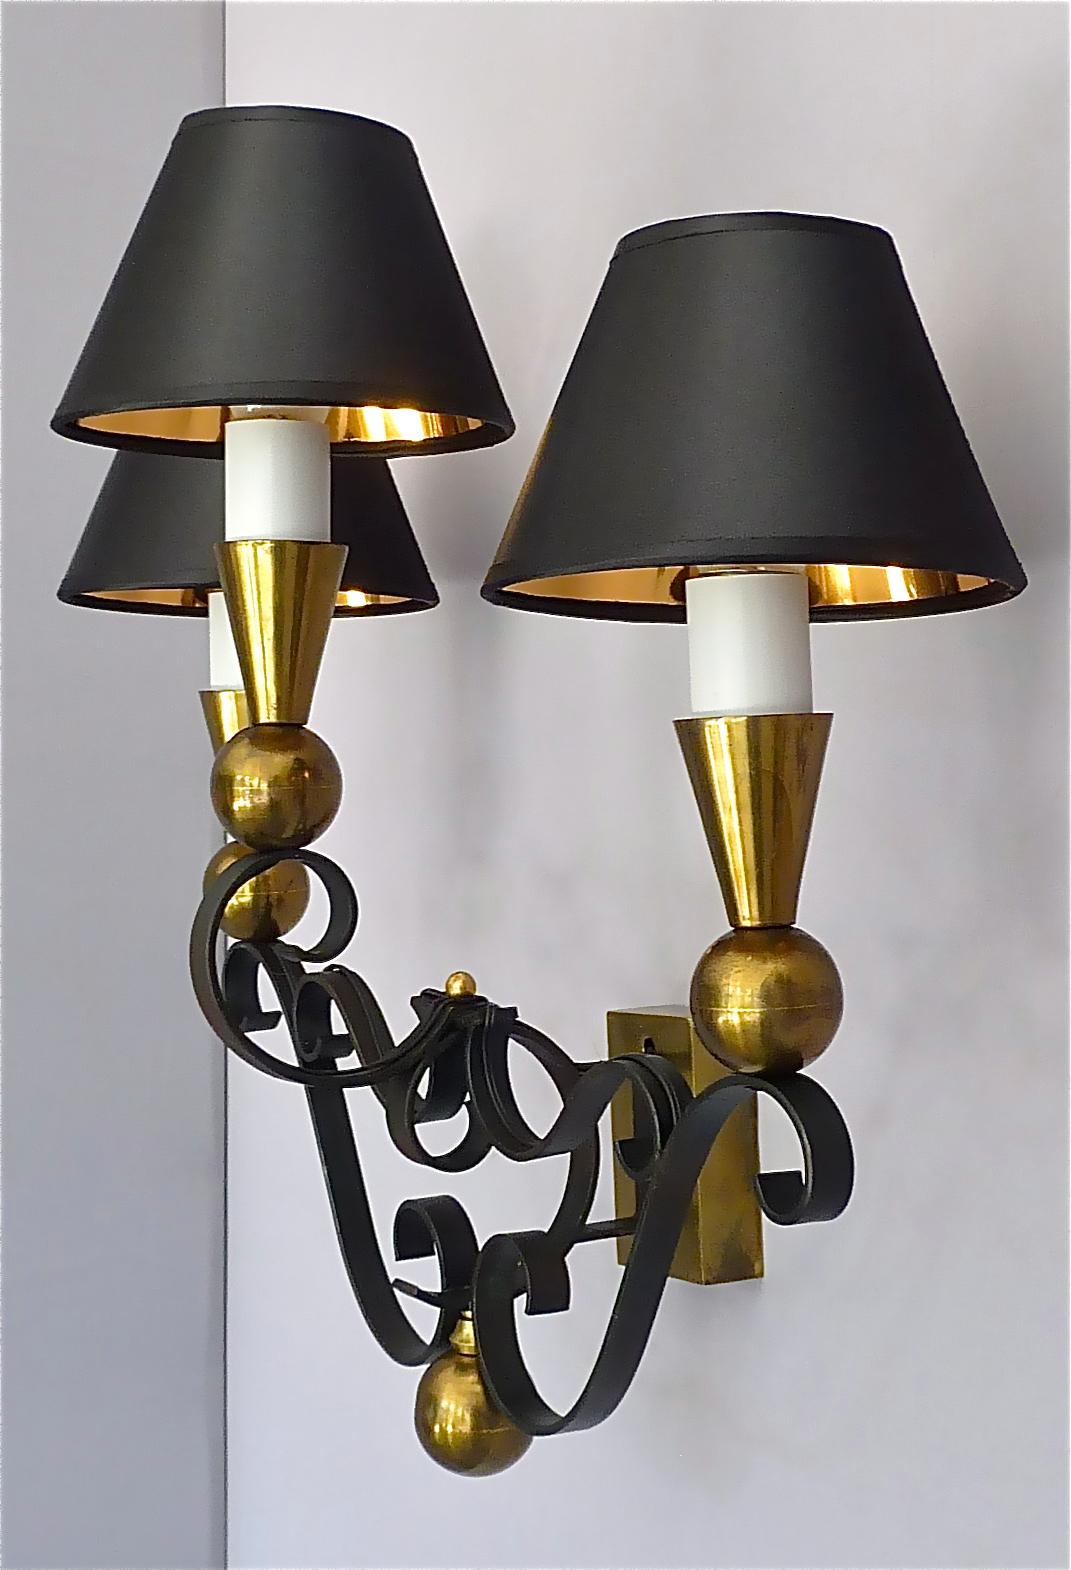 3 Rare Sconces Poillerat Adnet Style Black Forged Iron Brass Gold France 1950s For Sale 3